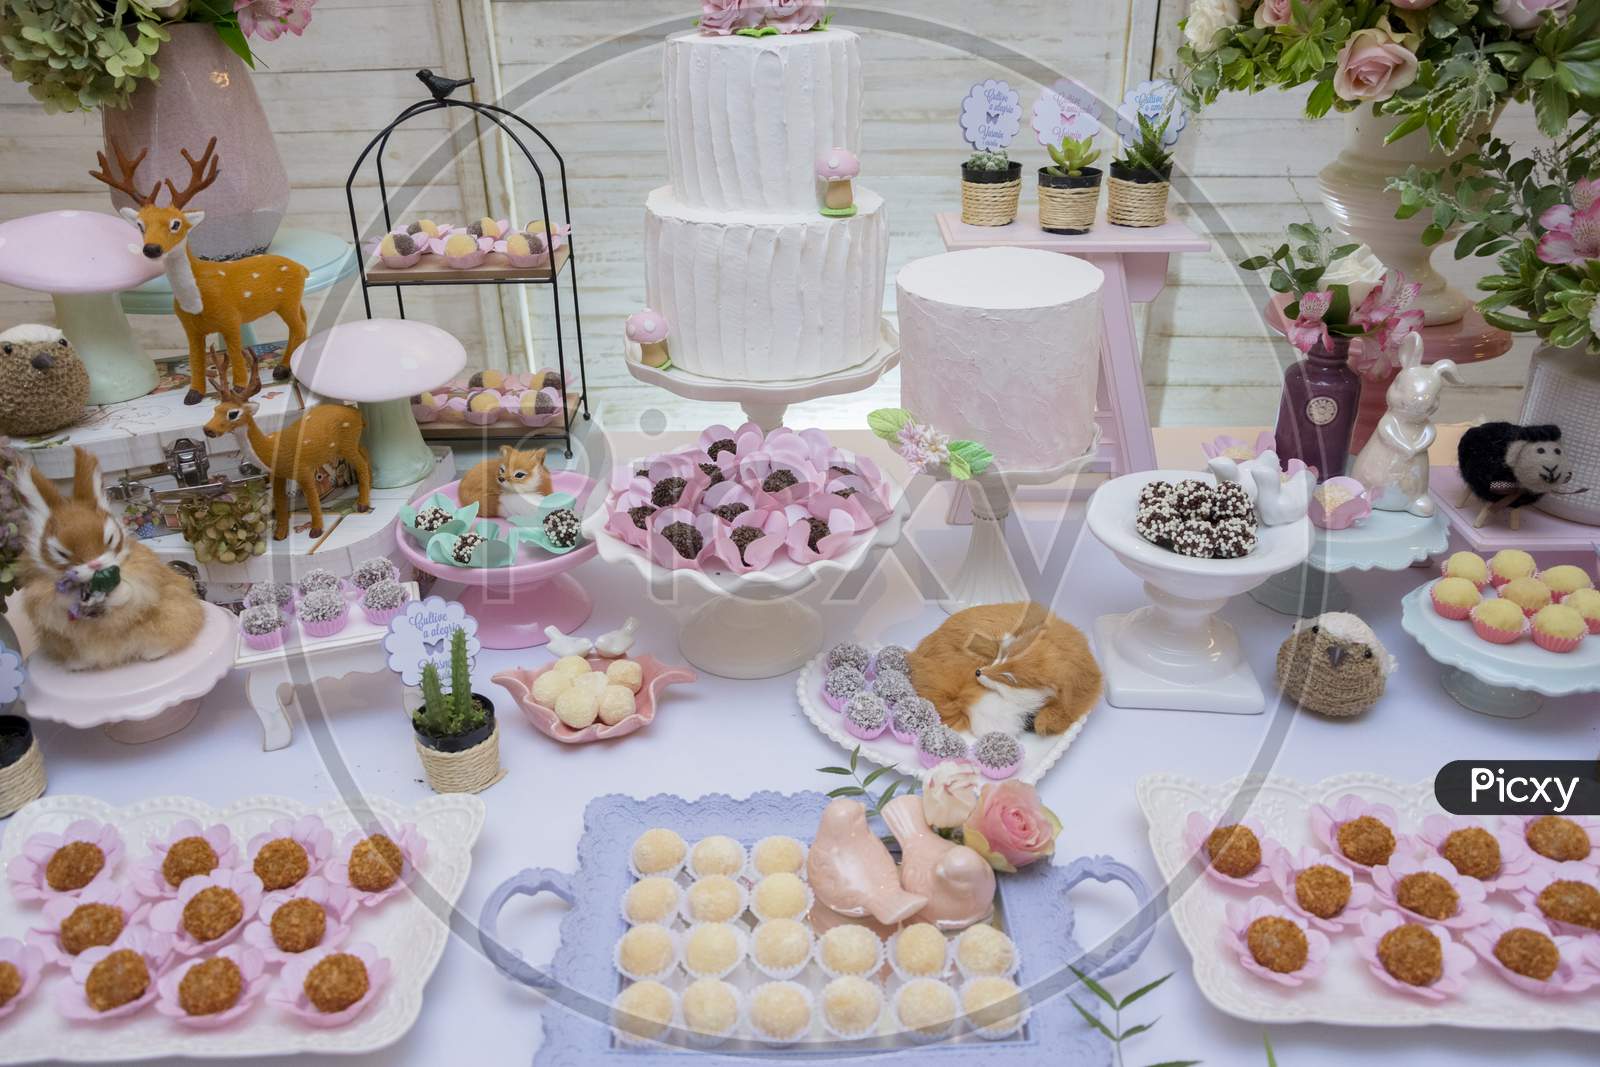 Details Of Luxurious Table Of Sweets And Birthday Cake